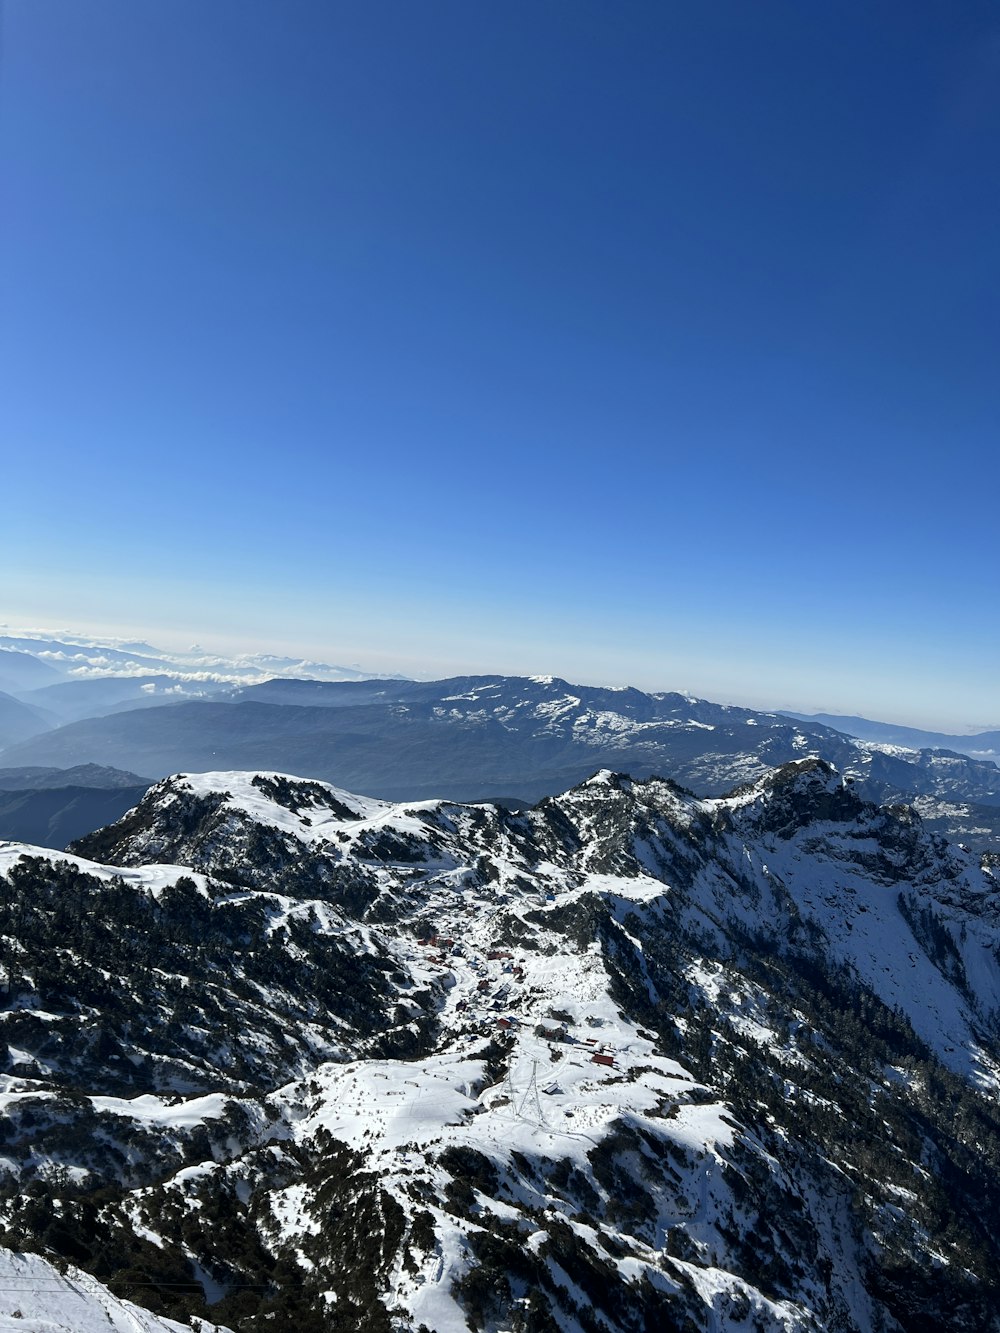 a view from the top of a snowy mountain